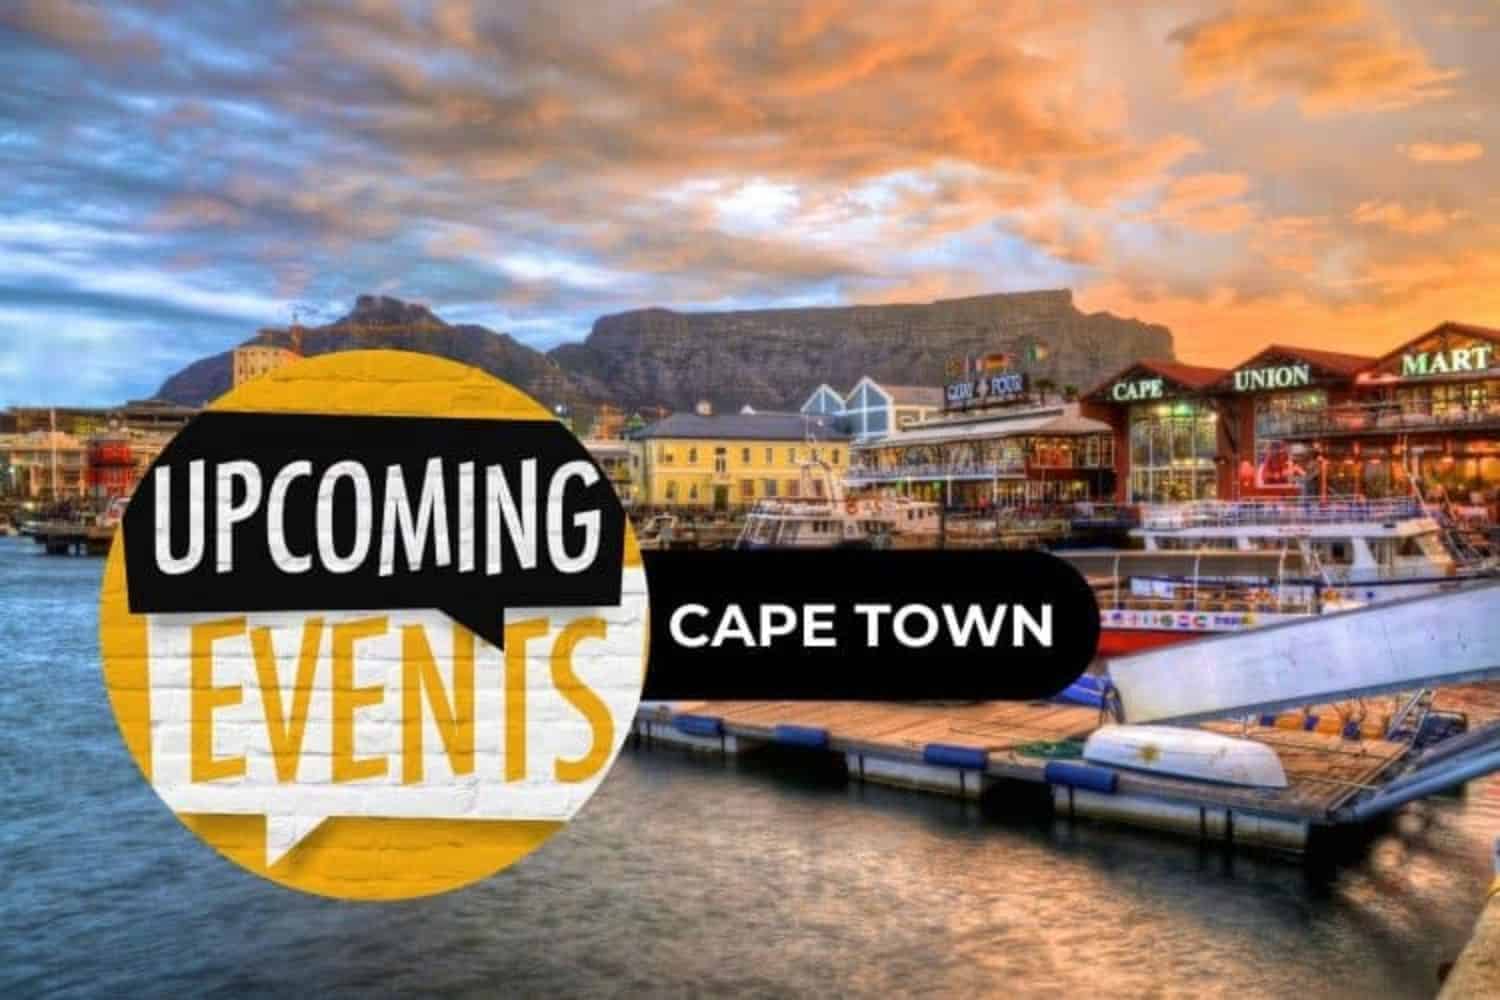 Cape Town events this February see what’s happening!